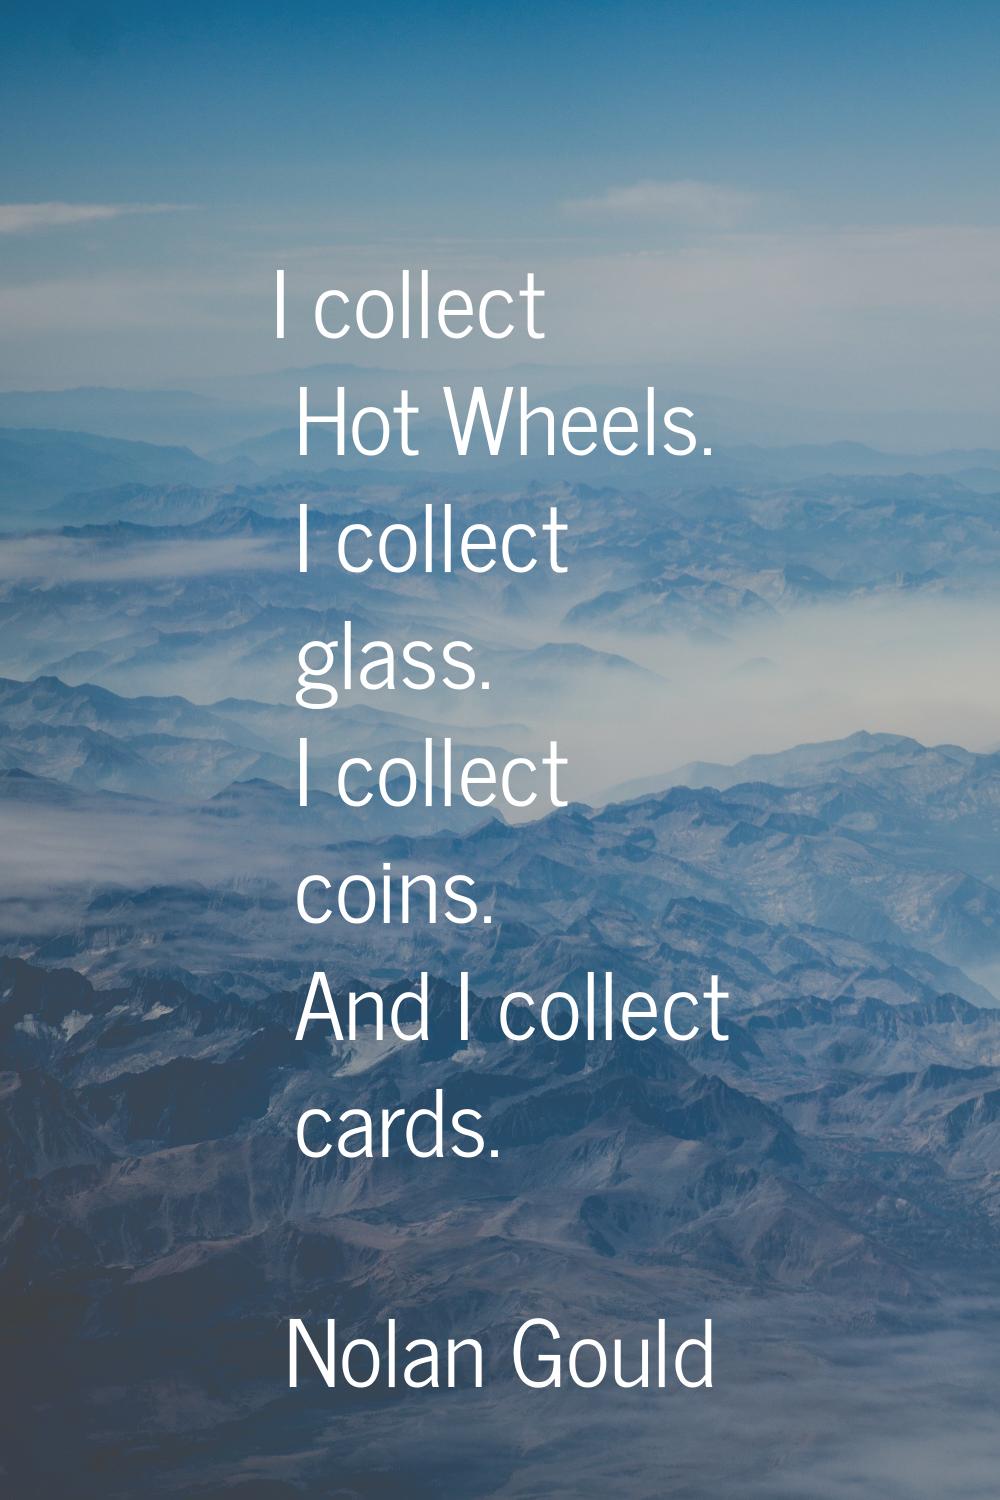 I collect Hot Wheels. I collect glass. I collect coins. And I collect cards.